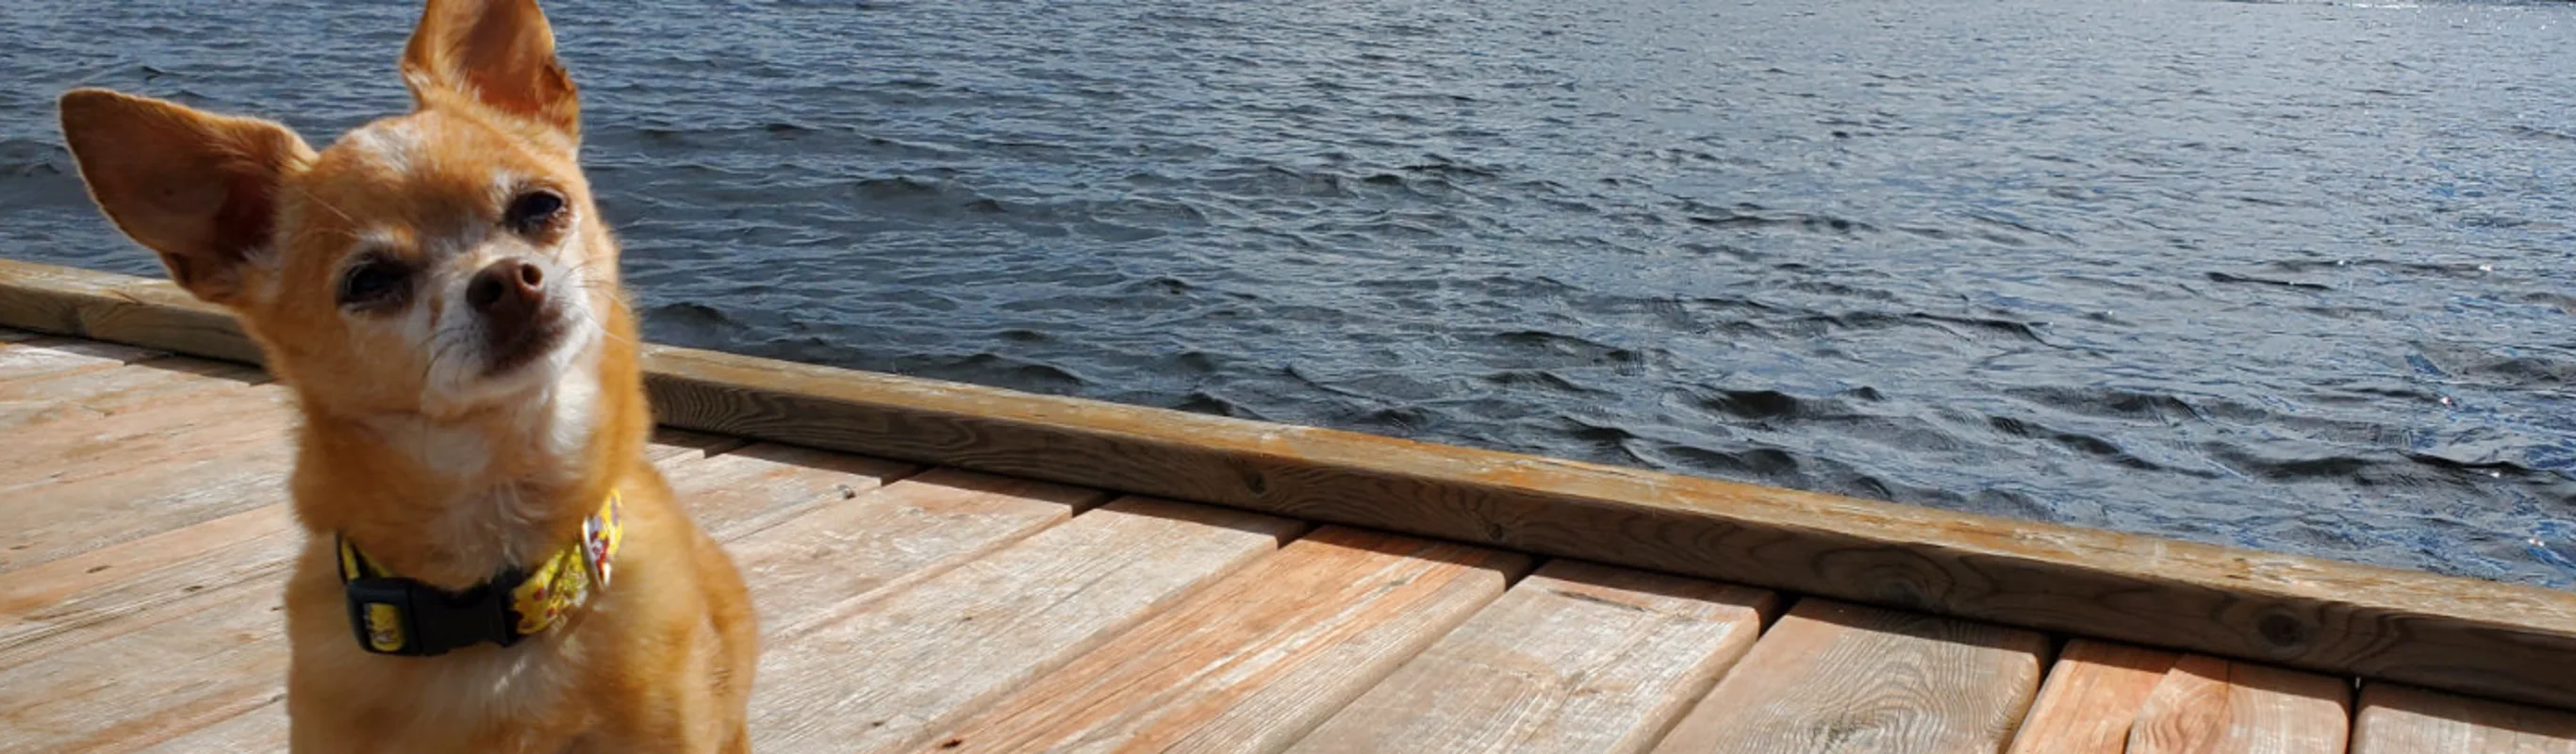 Orange and white Chihuahua sitting on a dock next to water